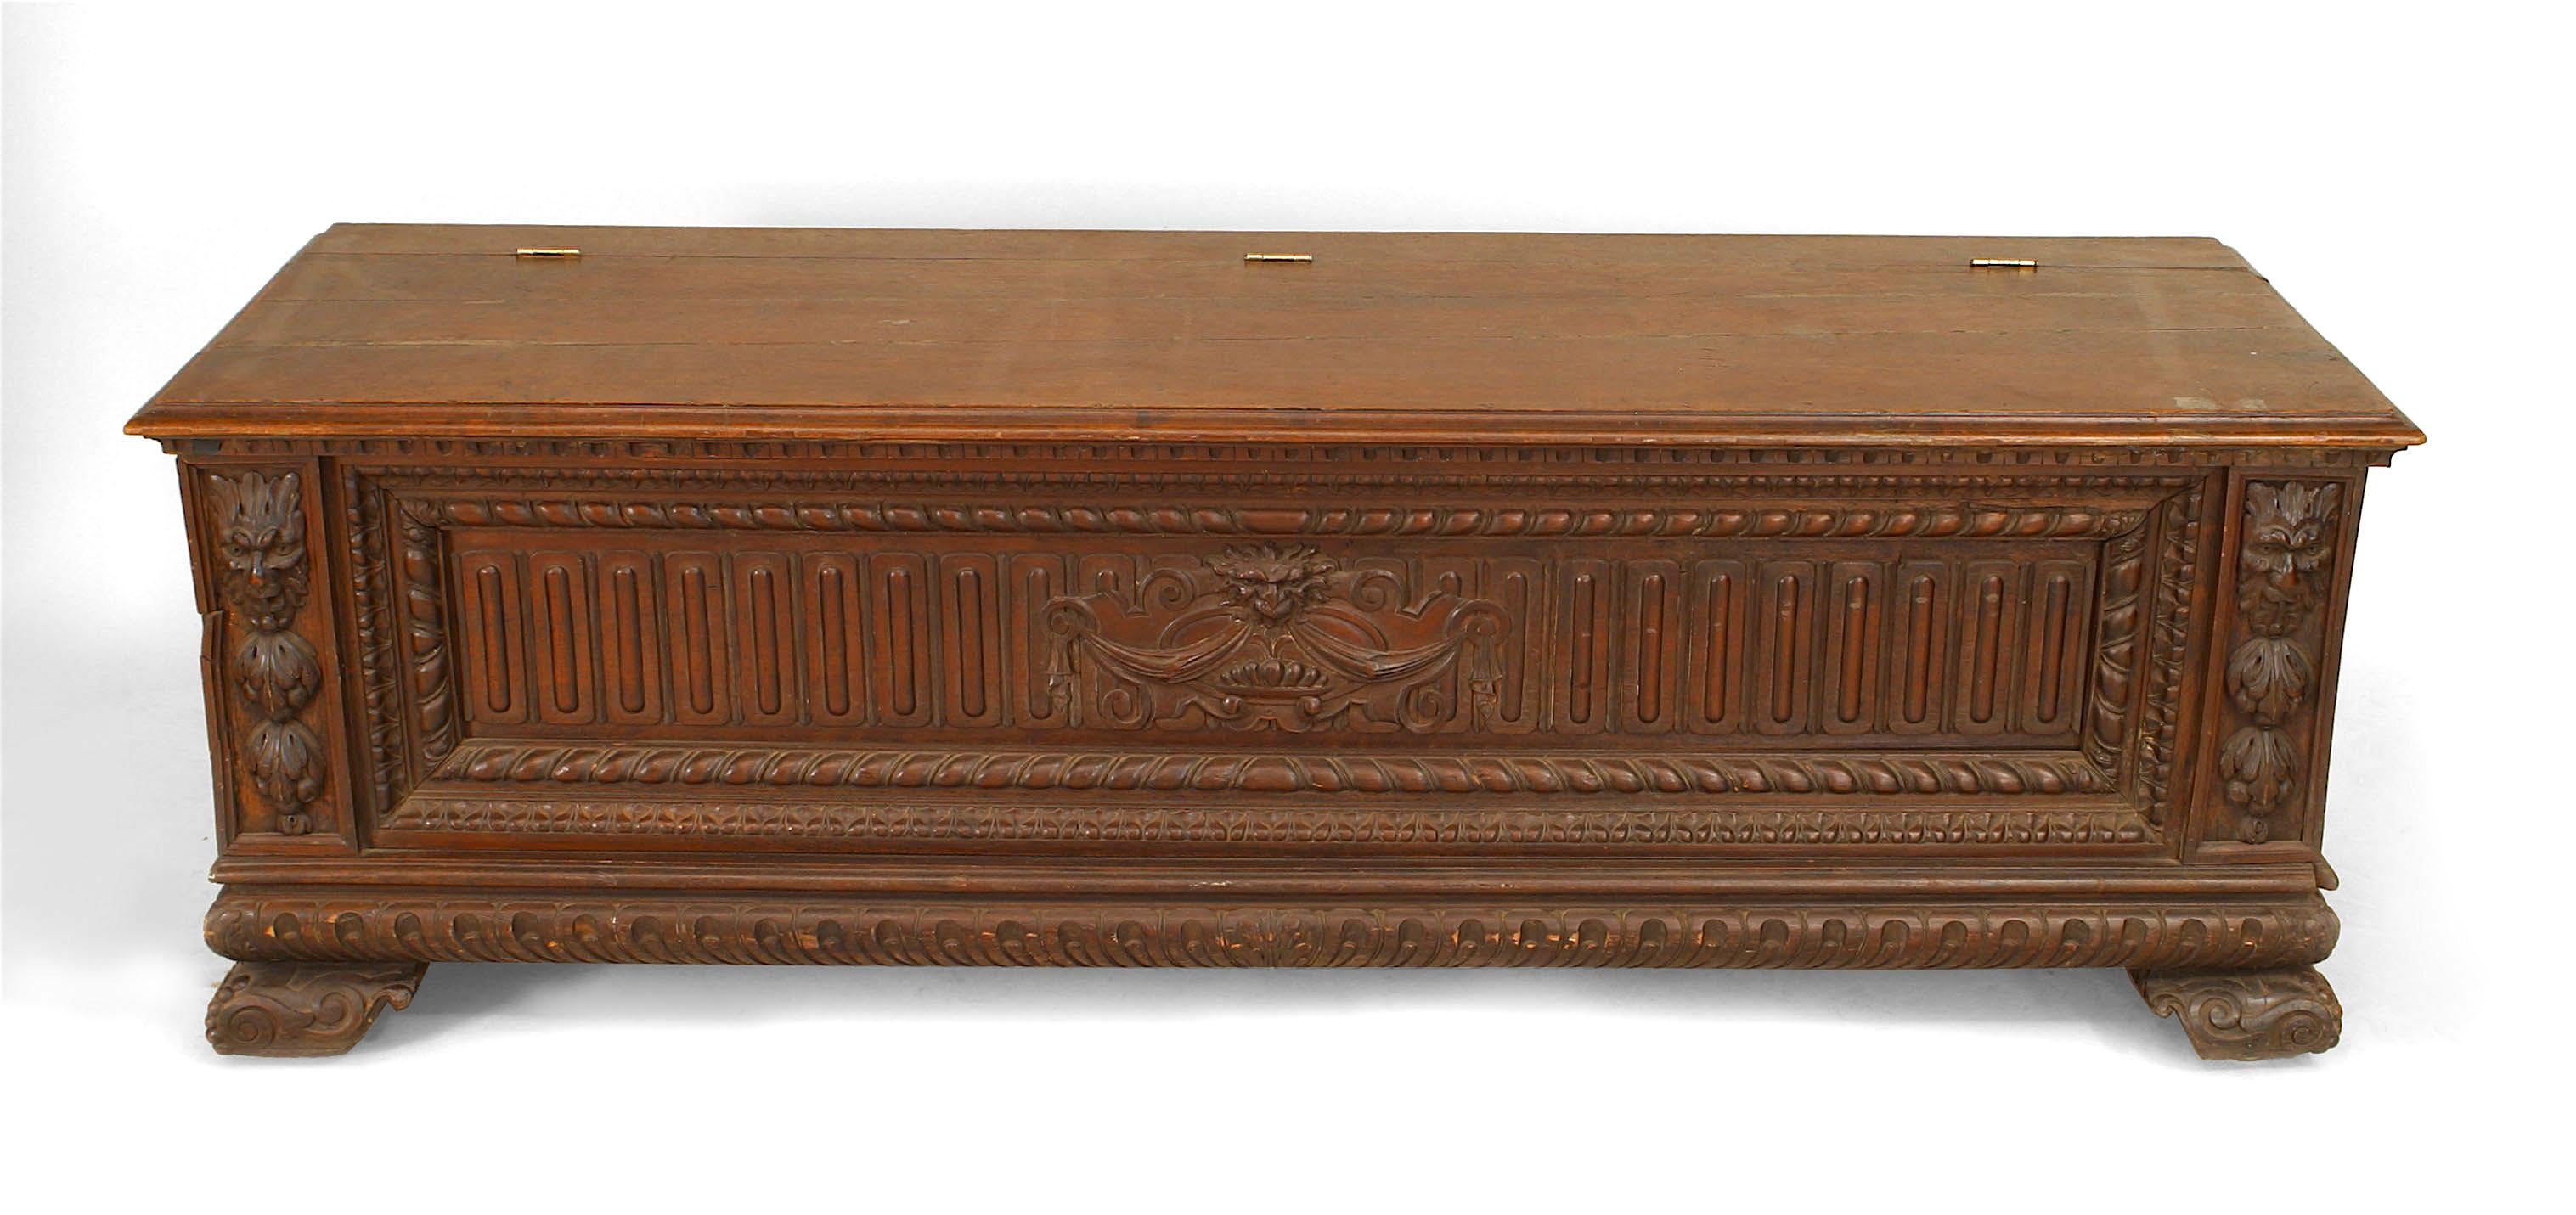 English Renaissance style (19th Cent) walnut carved cassone style floor trunk with linenfold design.
